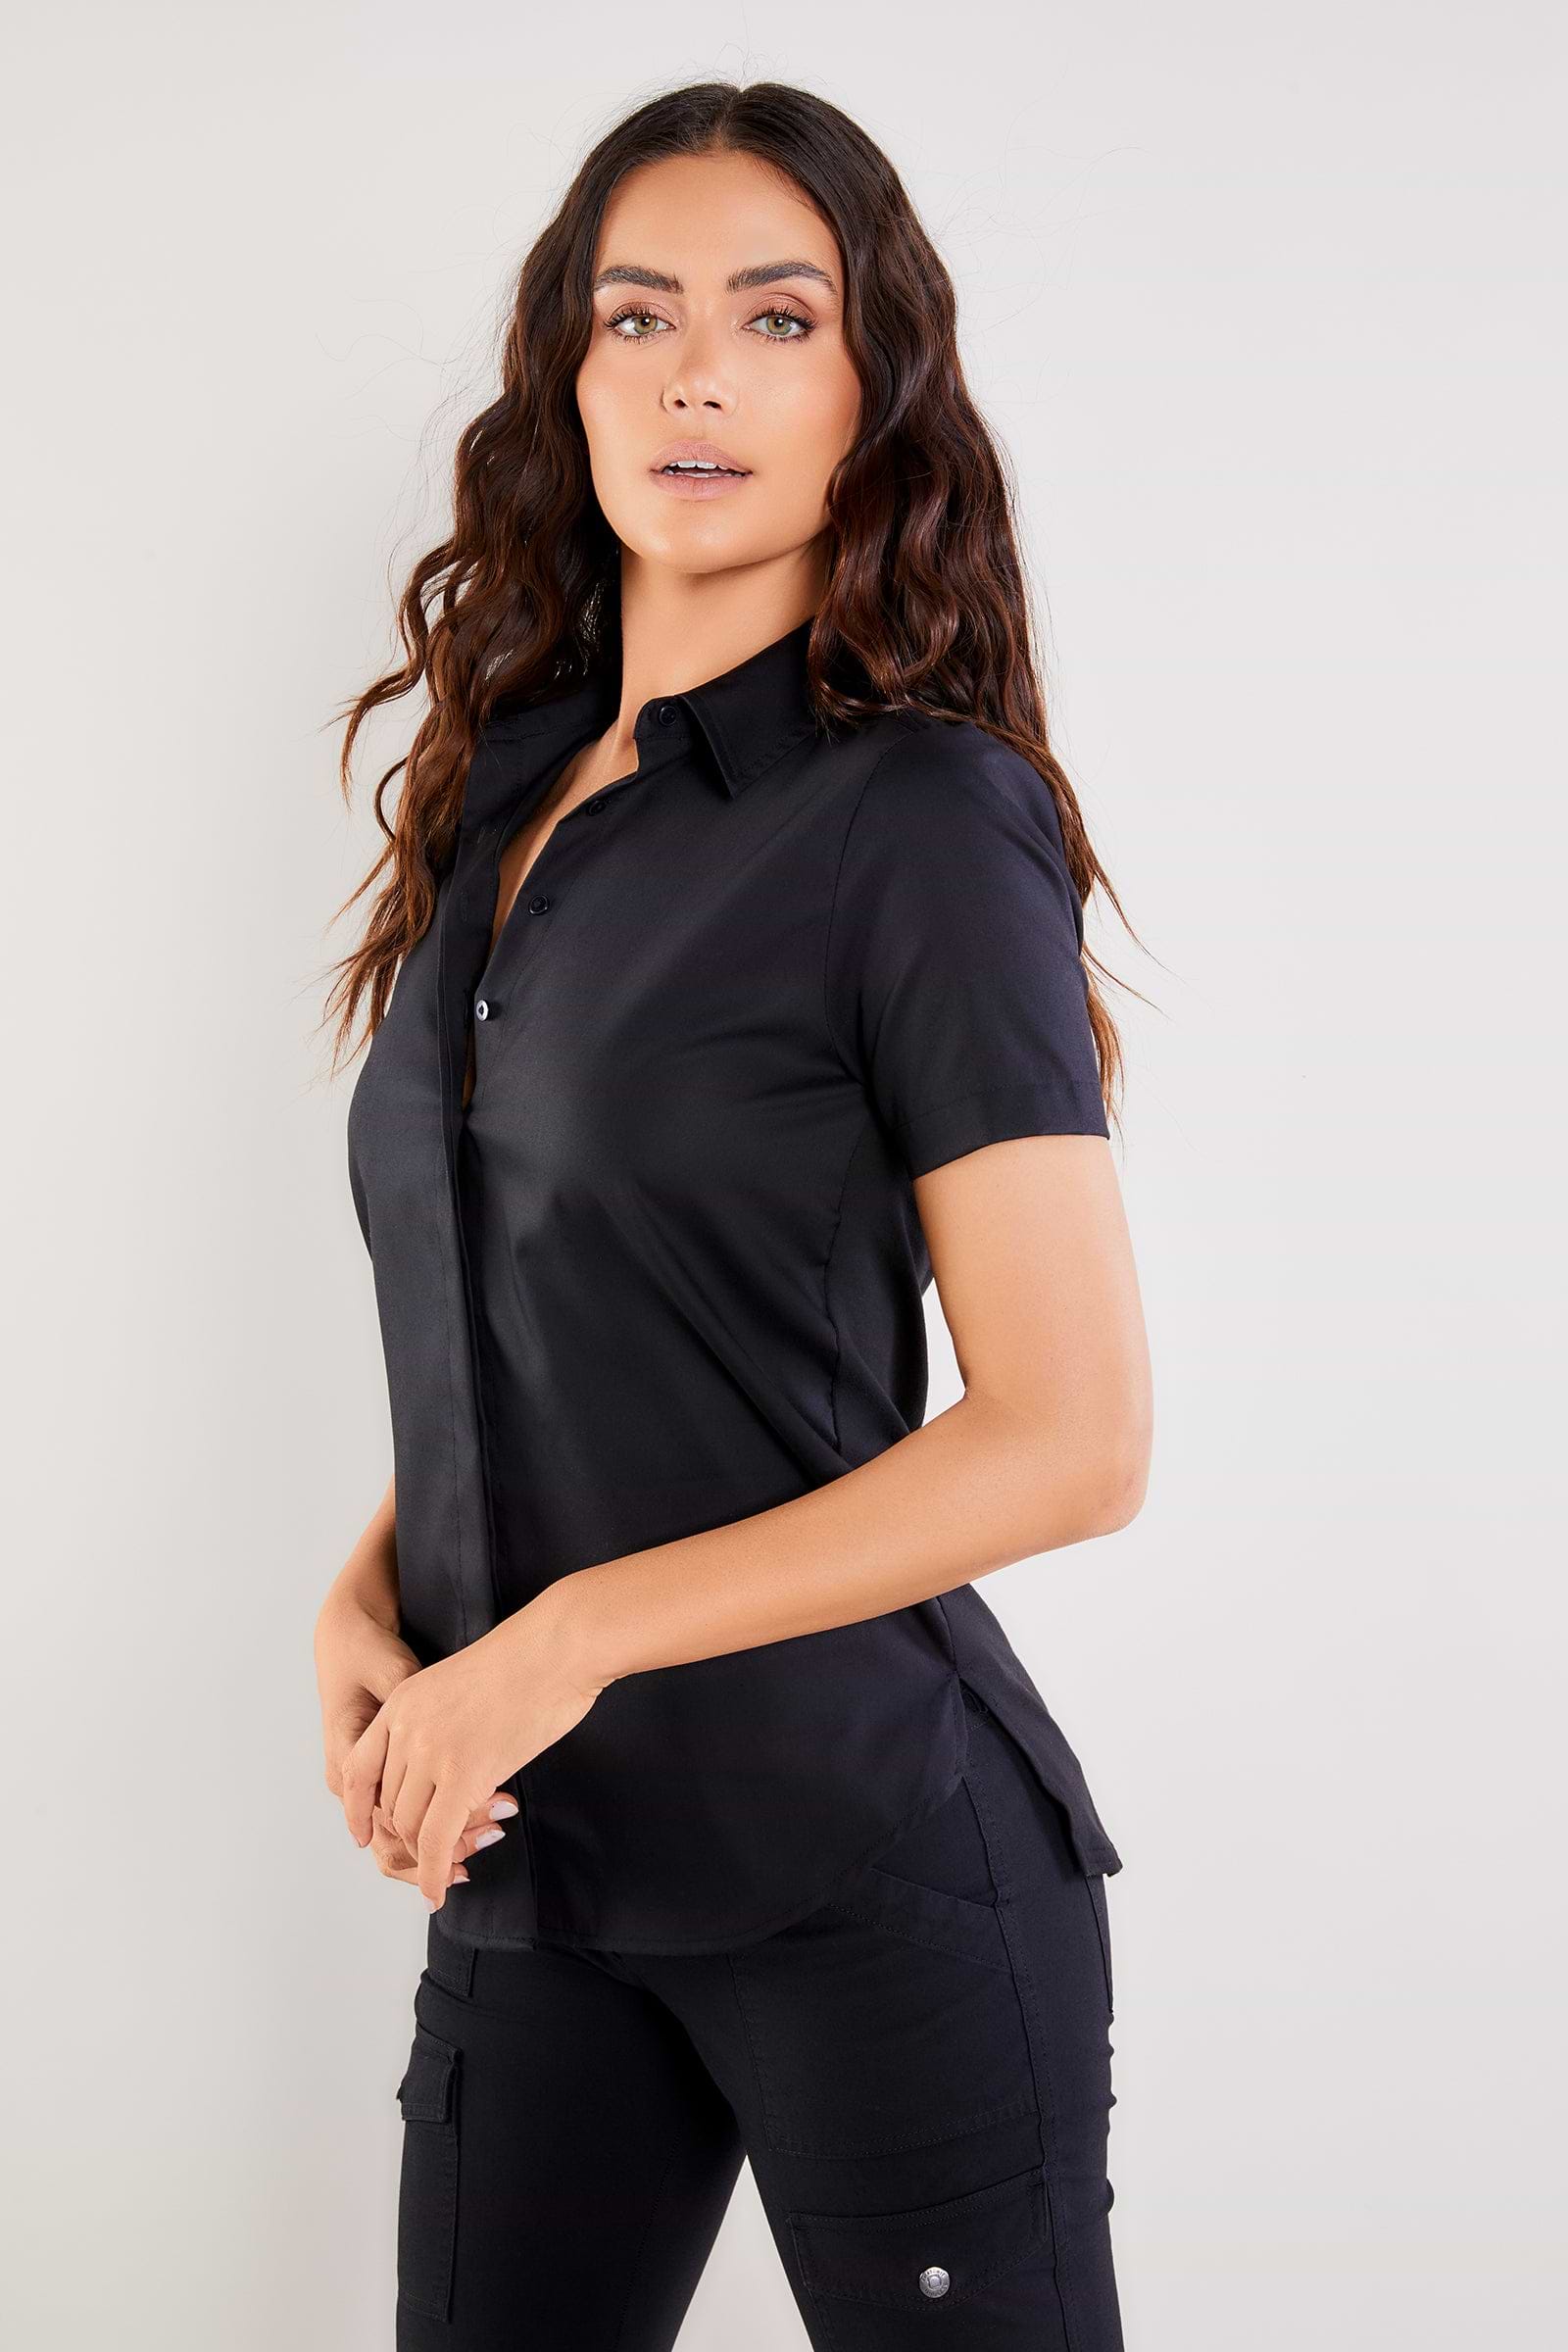 The Best Travel Top. Woman Showing the Side Profile of a Helia Top in Black.